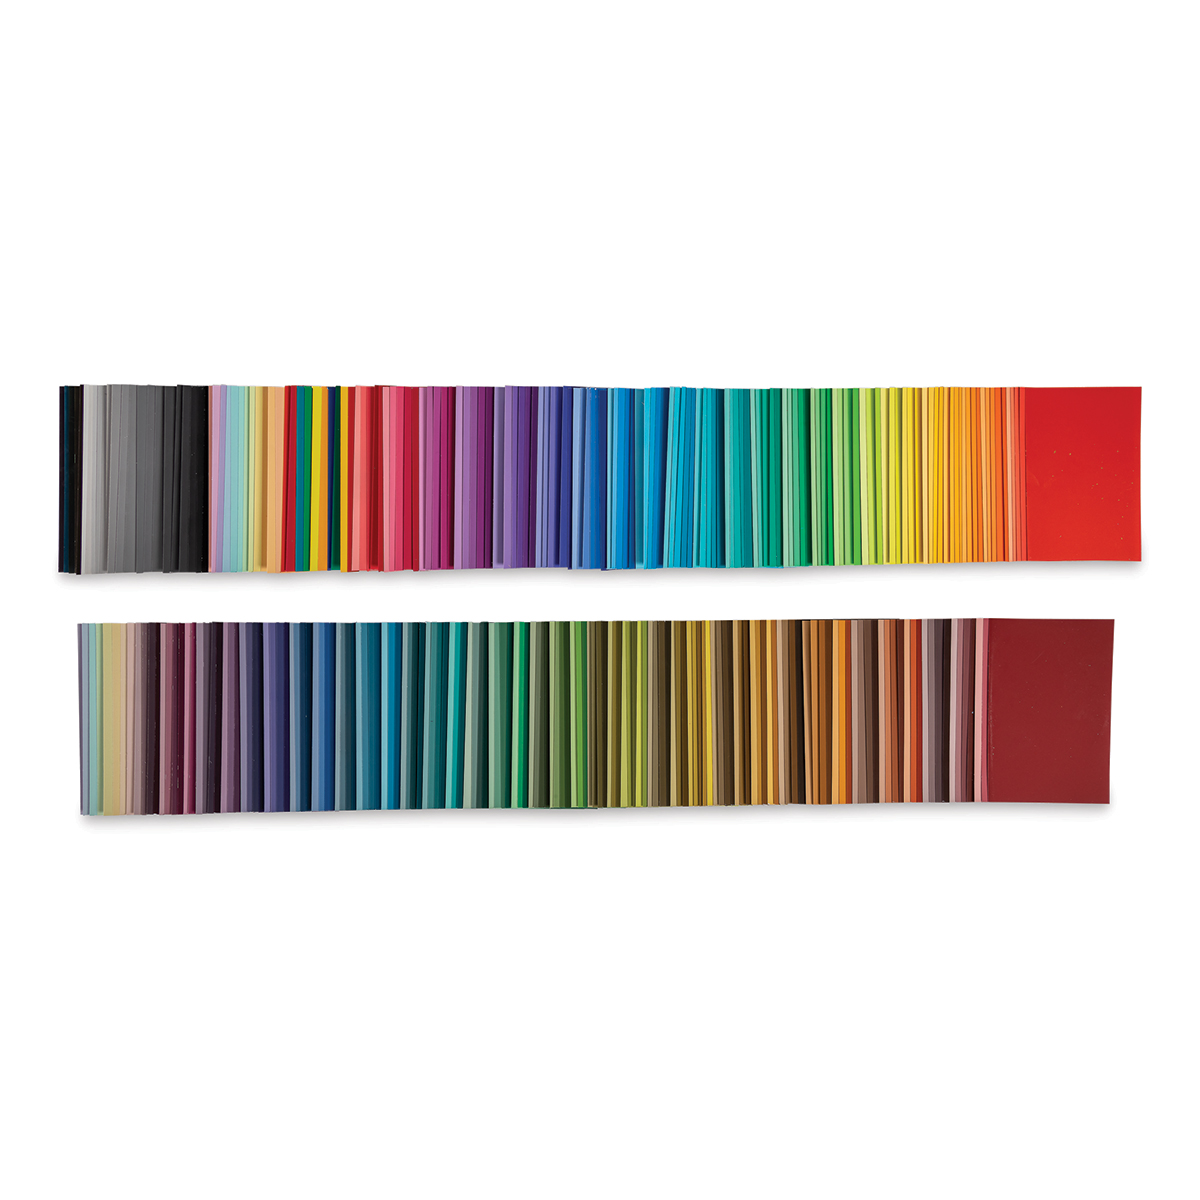 220 Sheets Colored Cardstock Paper Colorful Paper Assorted Colors